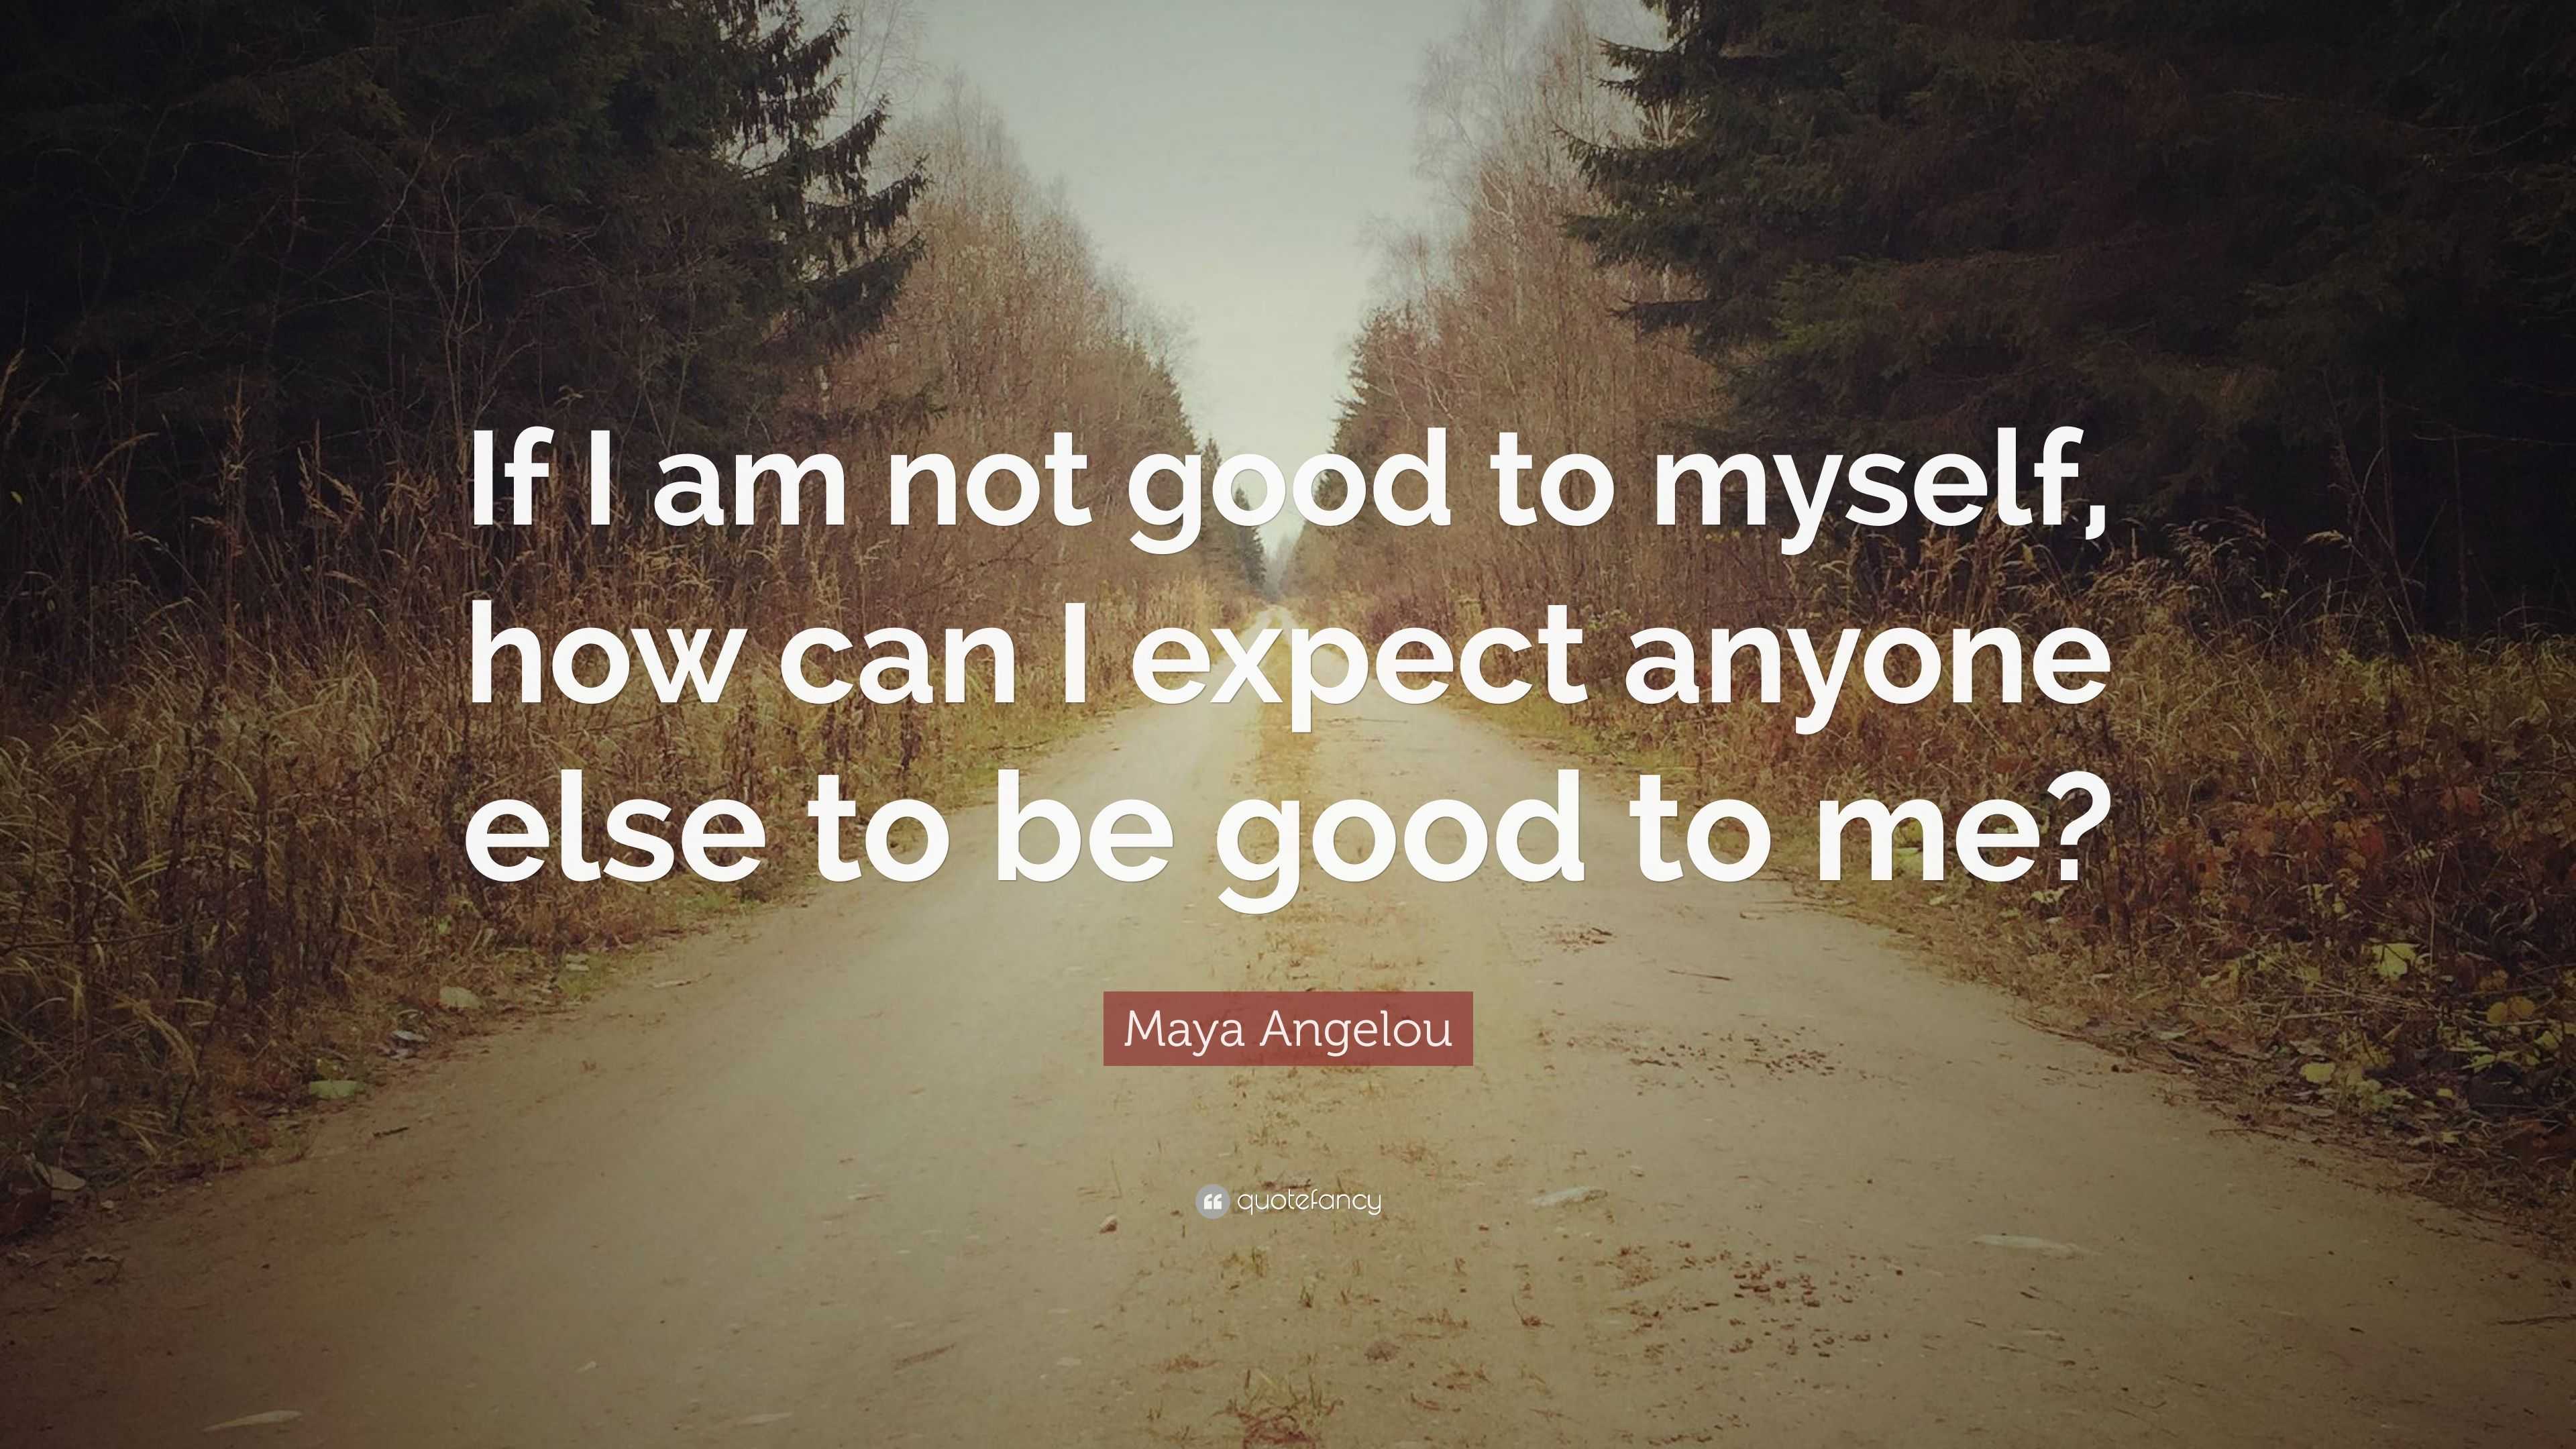 Maya Angelou Quote If I Am Not Good To Myself How Can I Expect Anyone Else